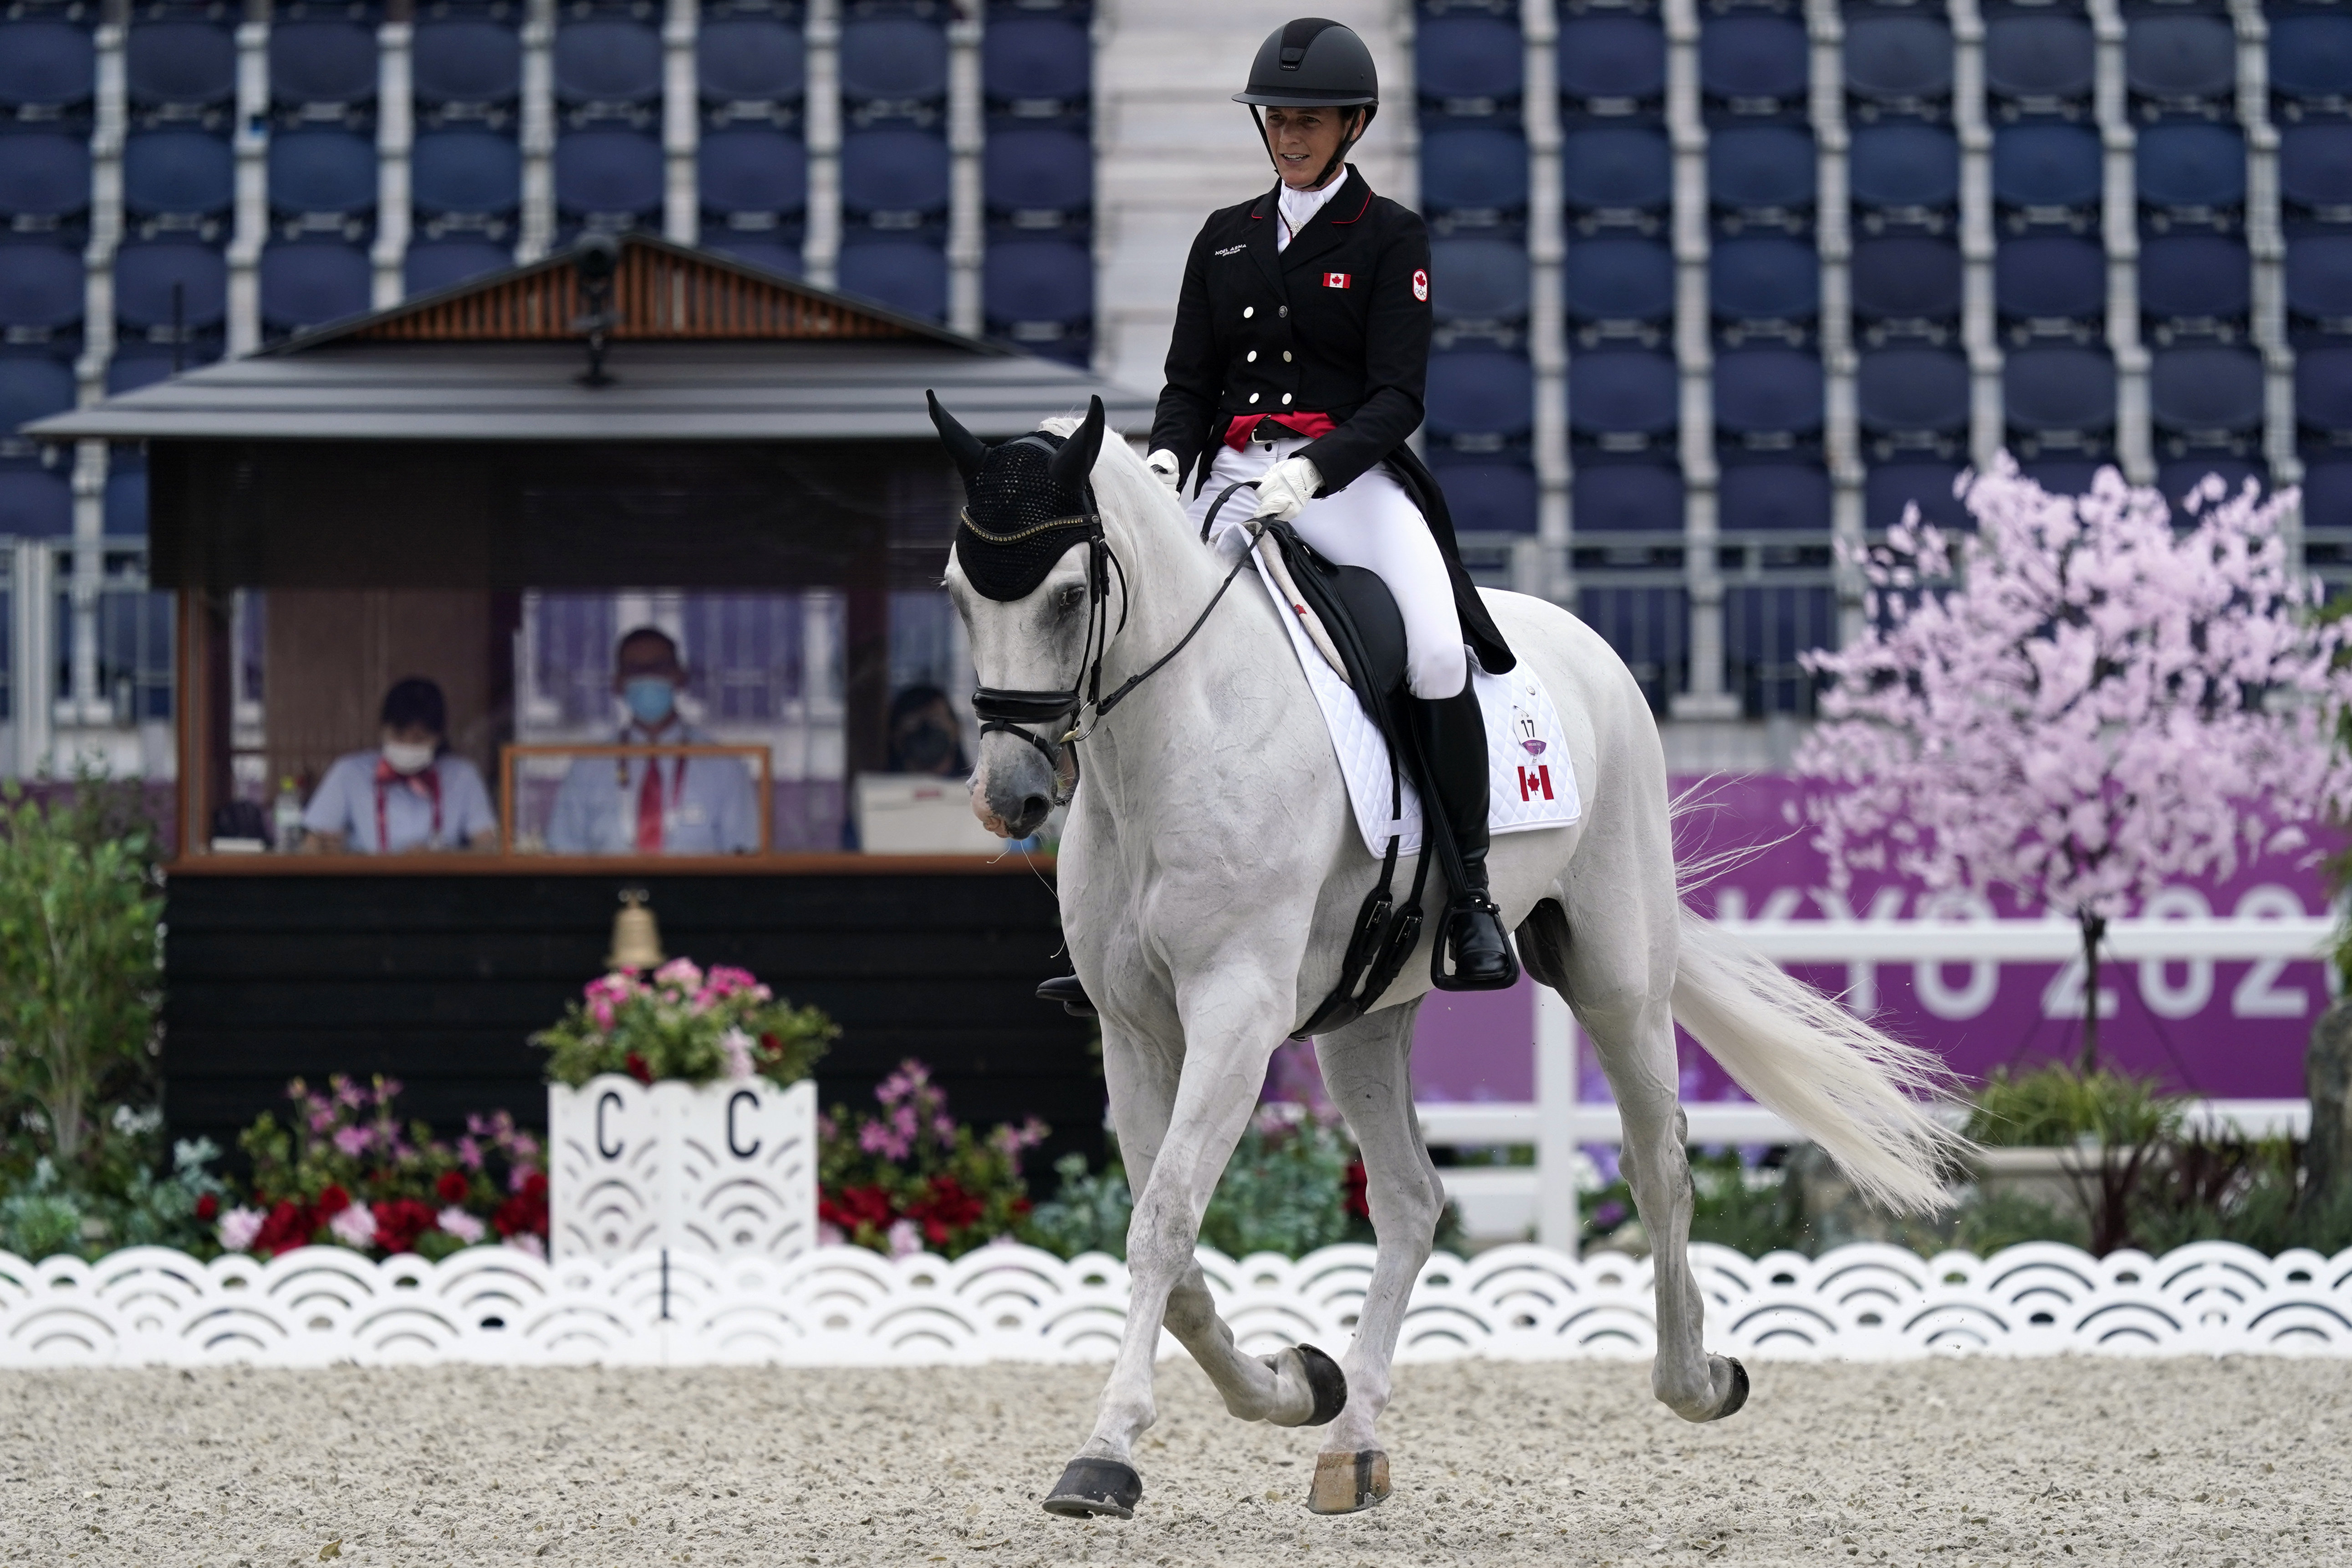 Colleen Loach rides a white horse in dressage competition 